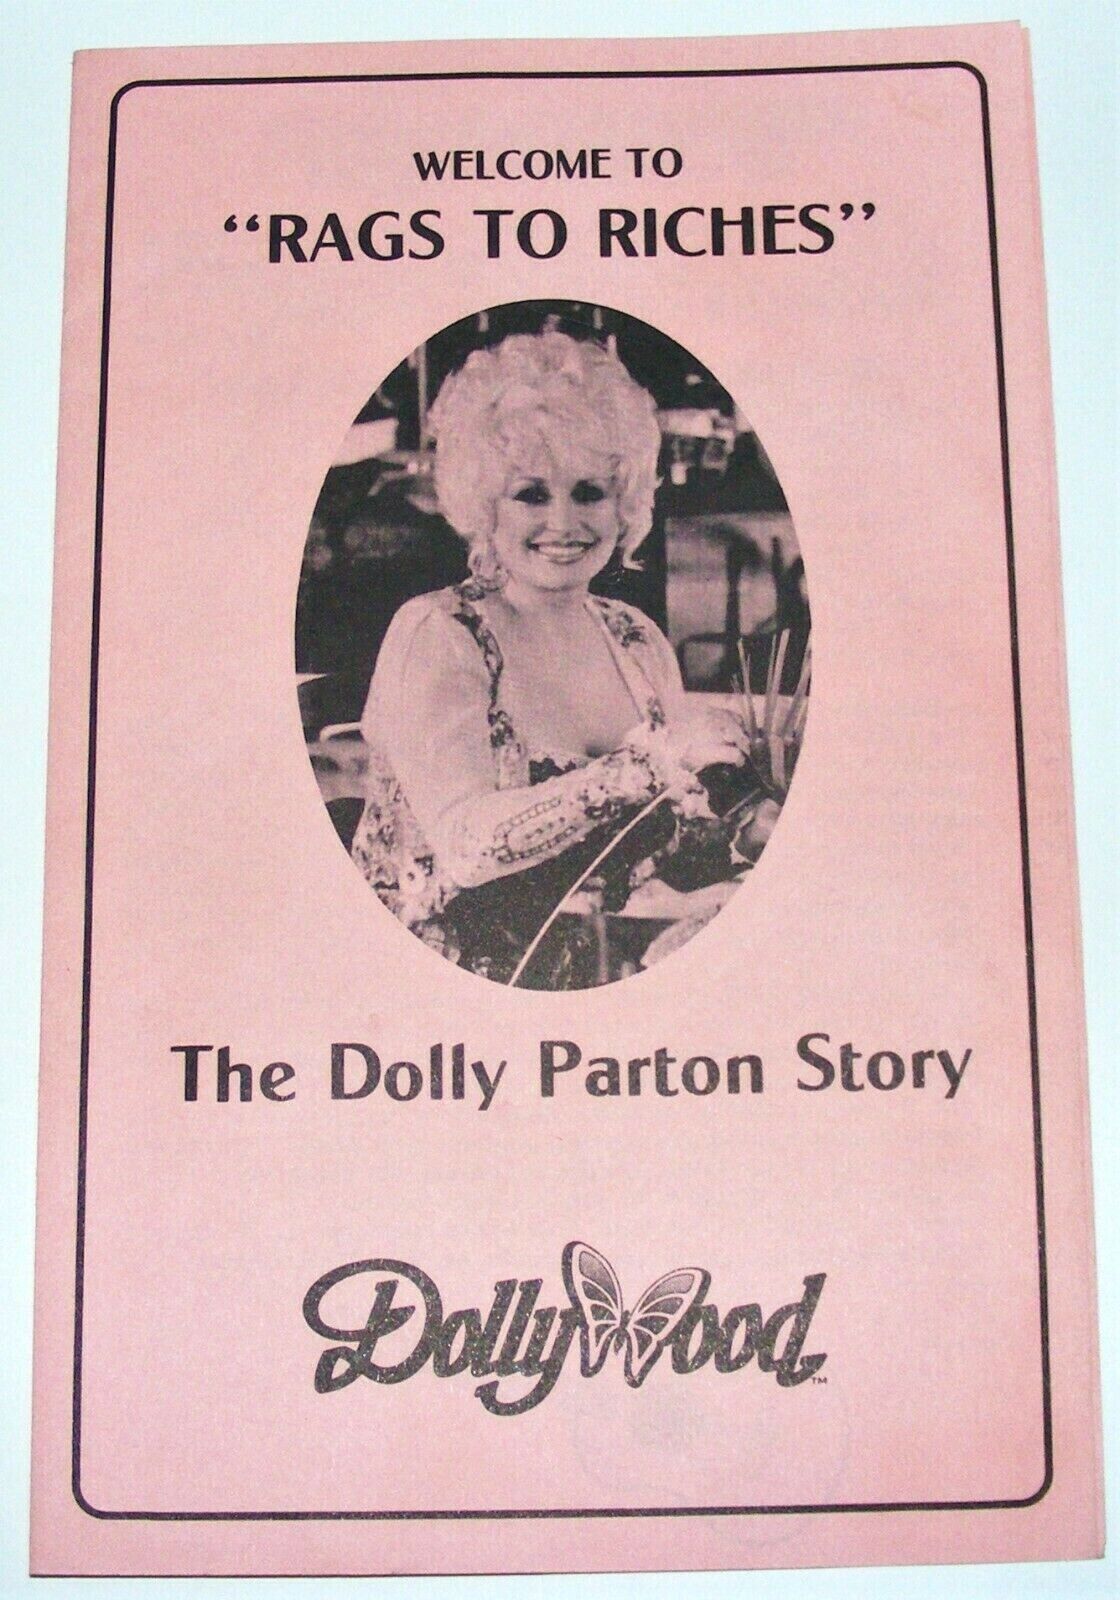 Vtg 1986 DOLLYWOOD Dolly Parton Museum Rags To Riches Story Brochure Pamphlet